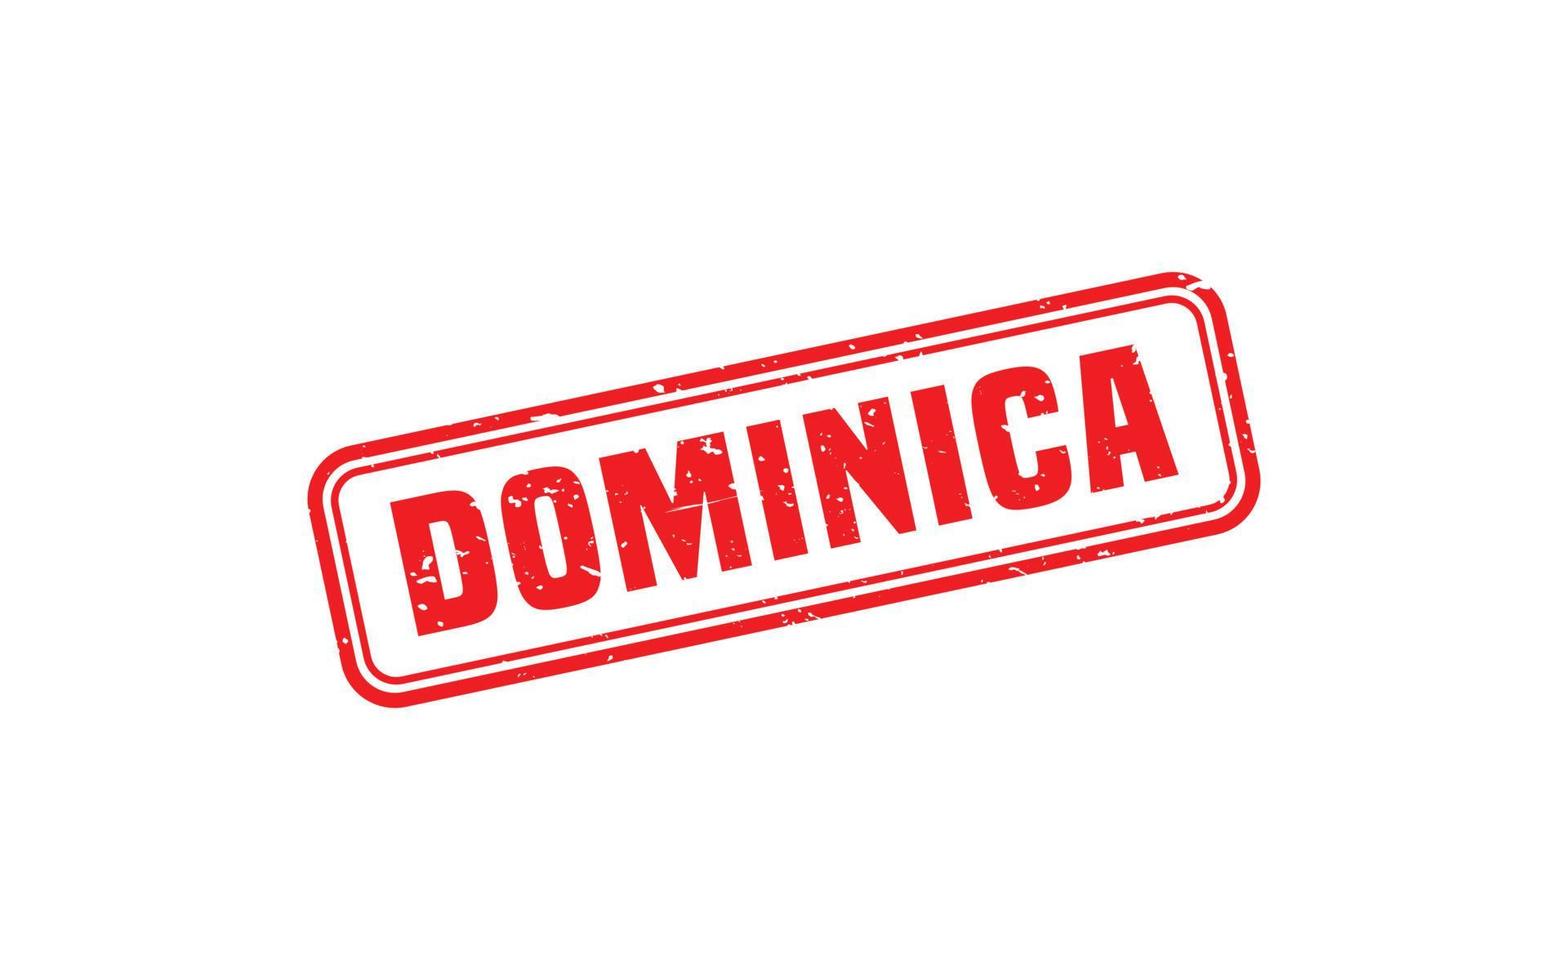 DOMINICA stamp rubber with grunge style on white background vector